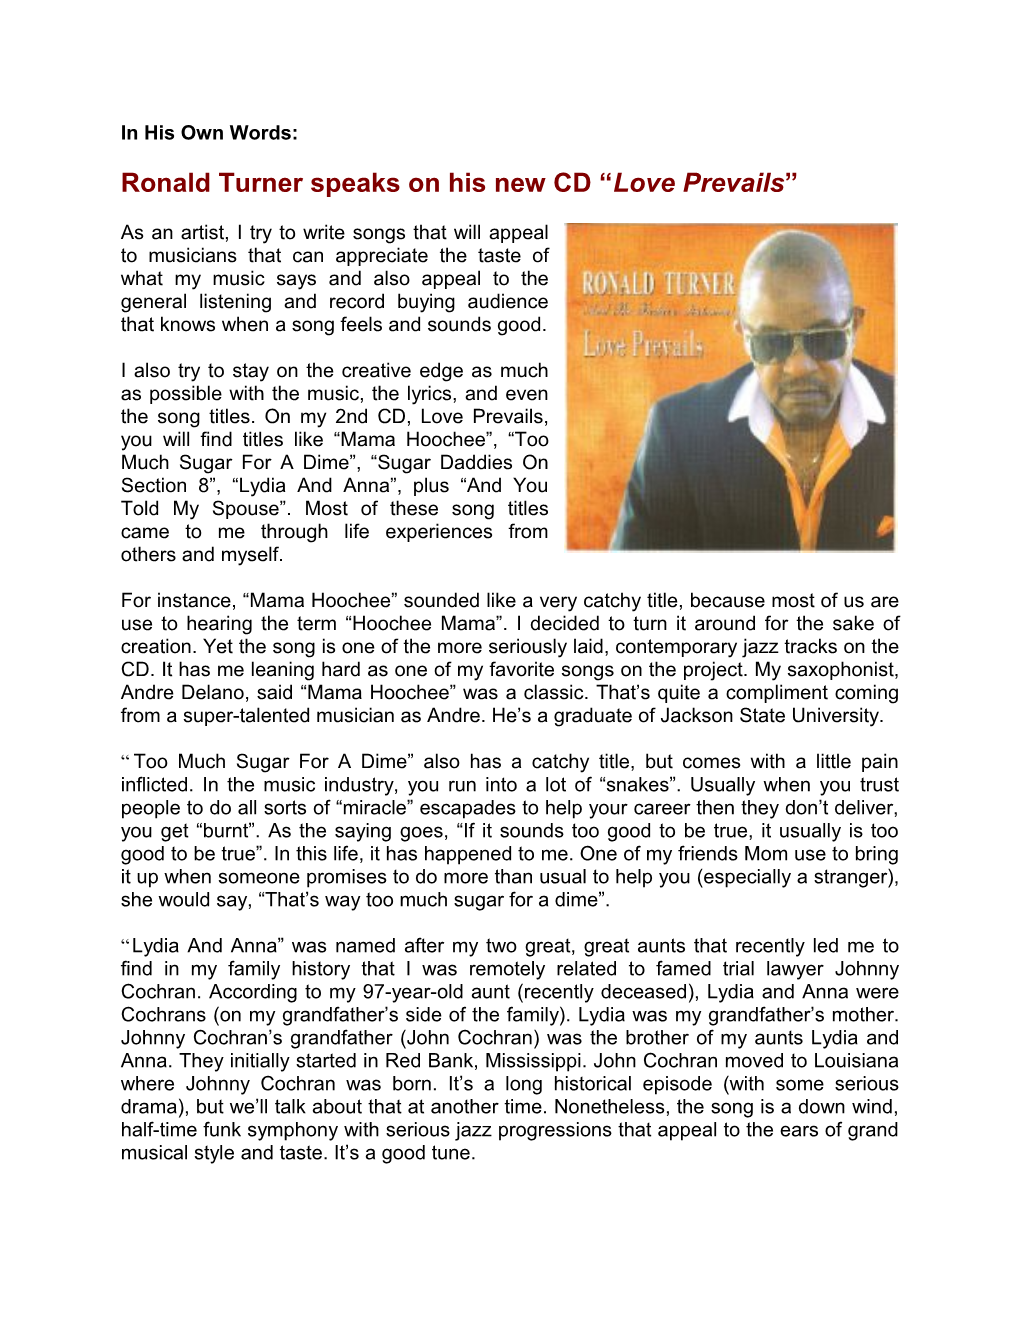 In His Own Words: Ronald Turner Speaks on His New CD Love Prevails